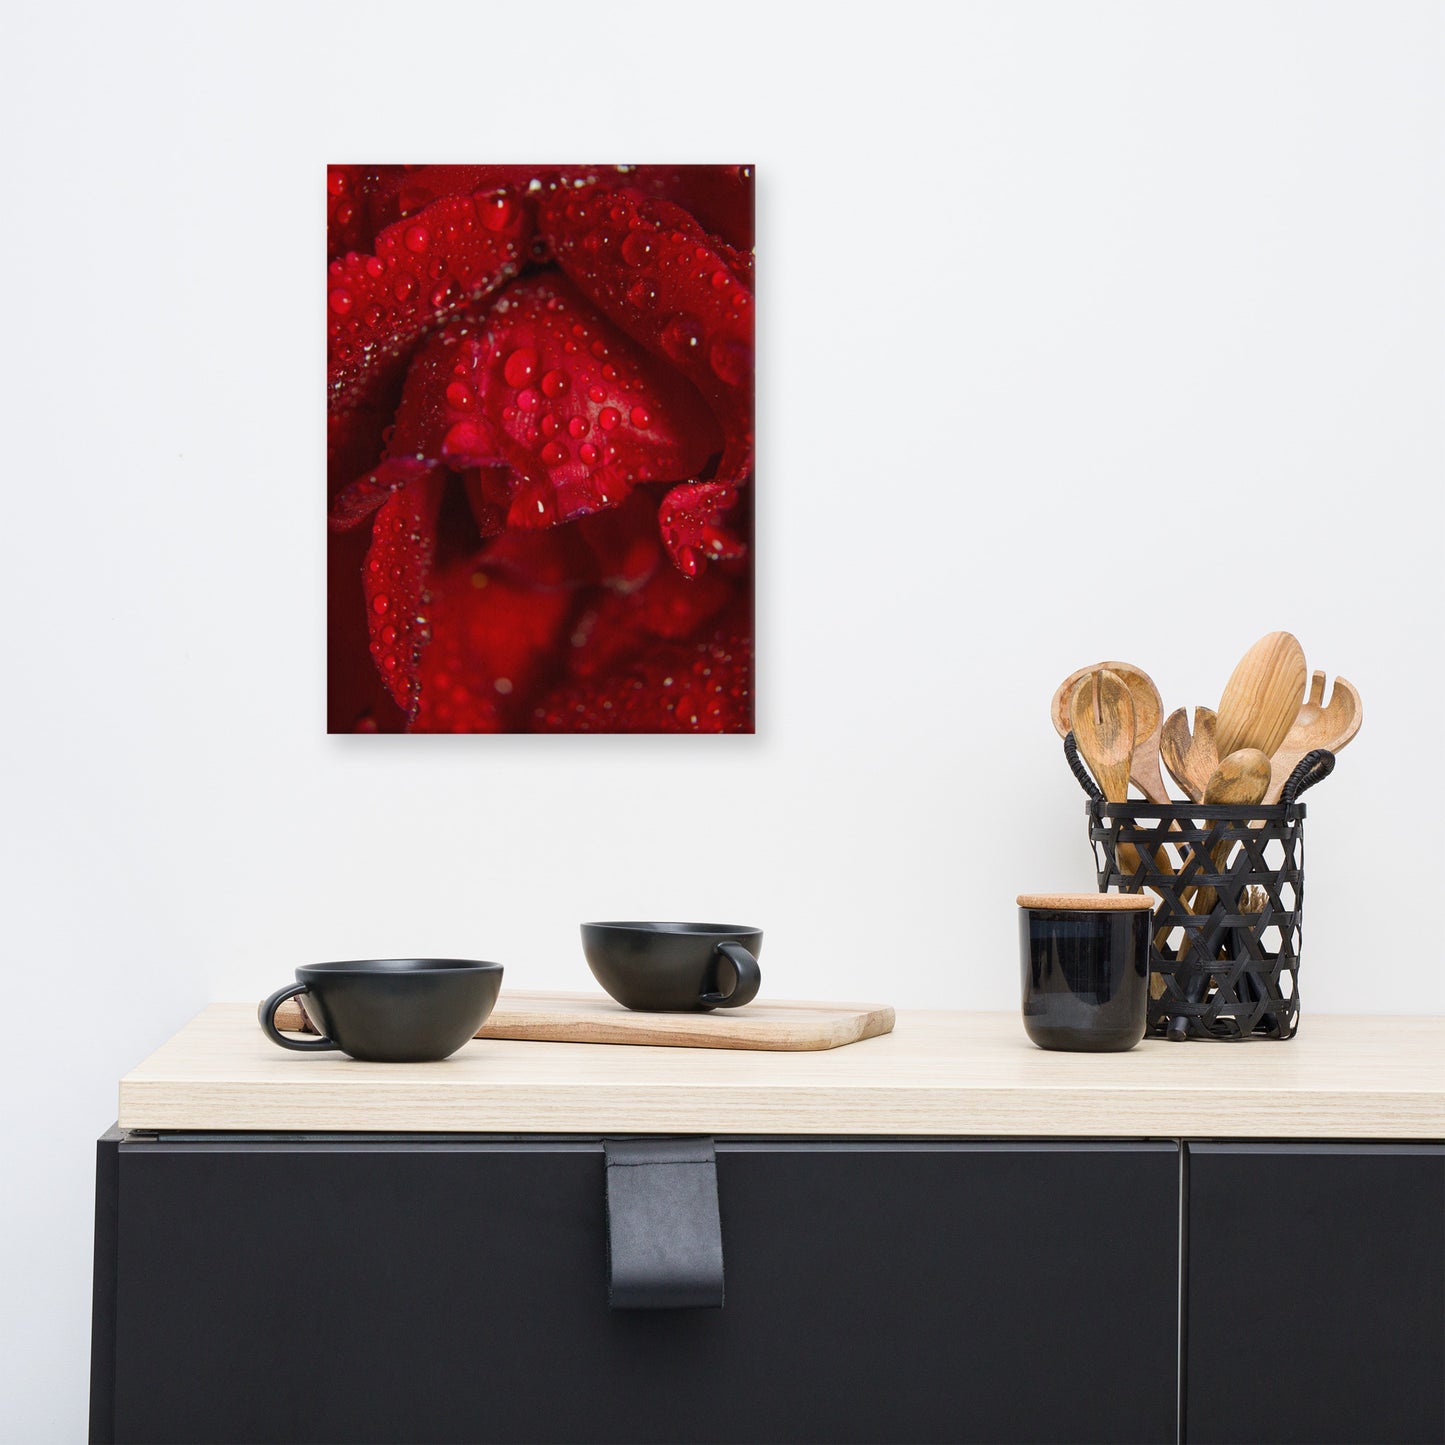 Royal Red Rose Floral Nature Canvas Wall Art Prints